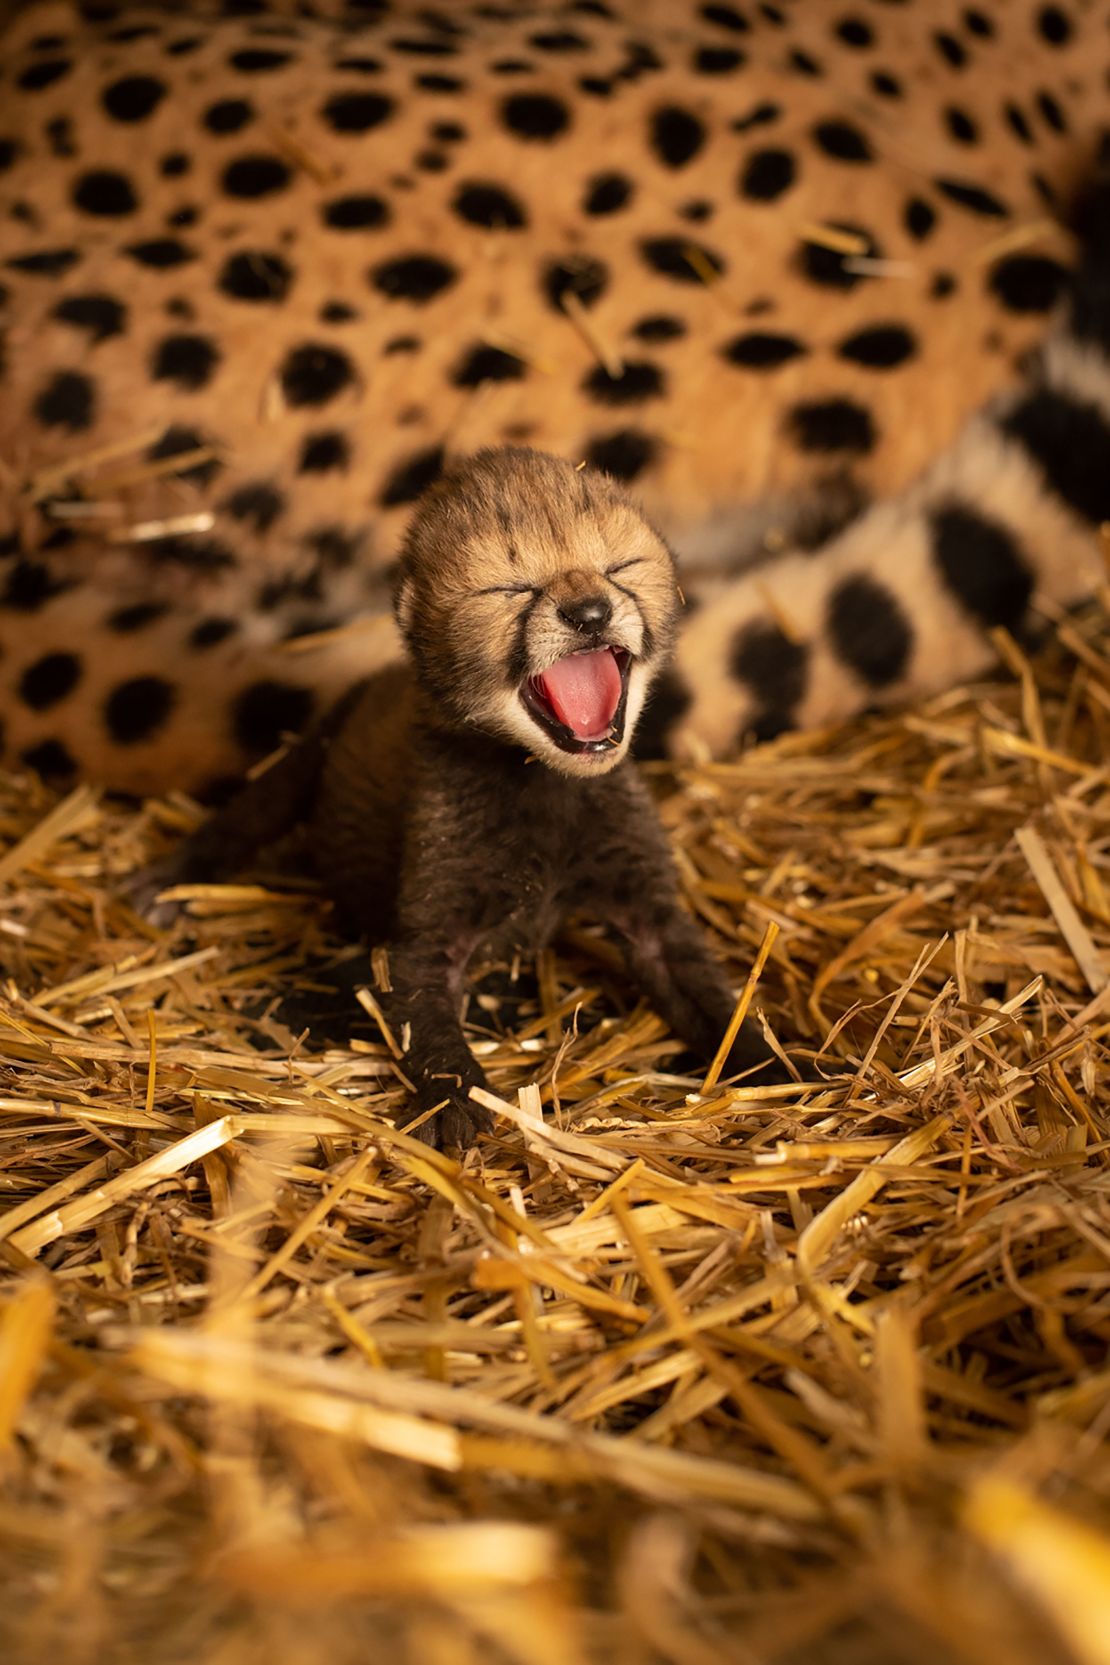 One of the baby cheetahs sits next to its surrogate mother, Izzy, at the Columbus Zoo.